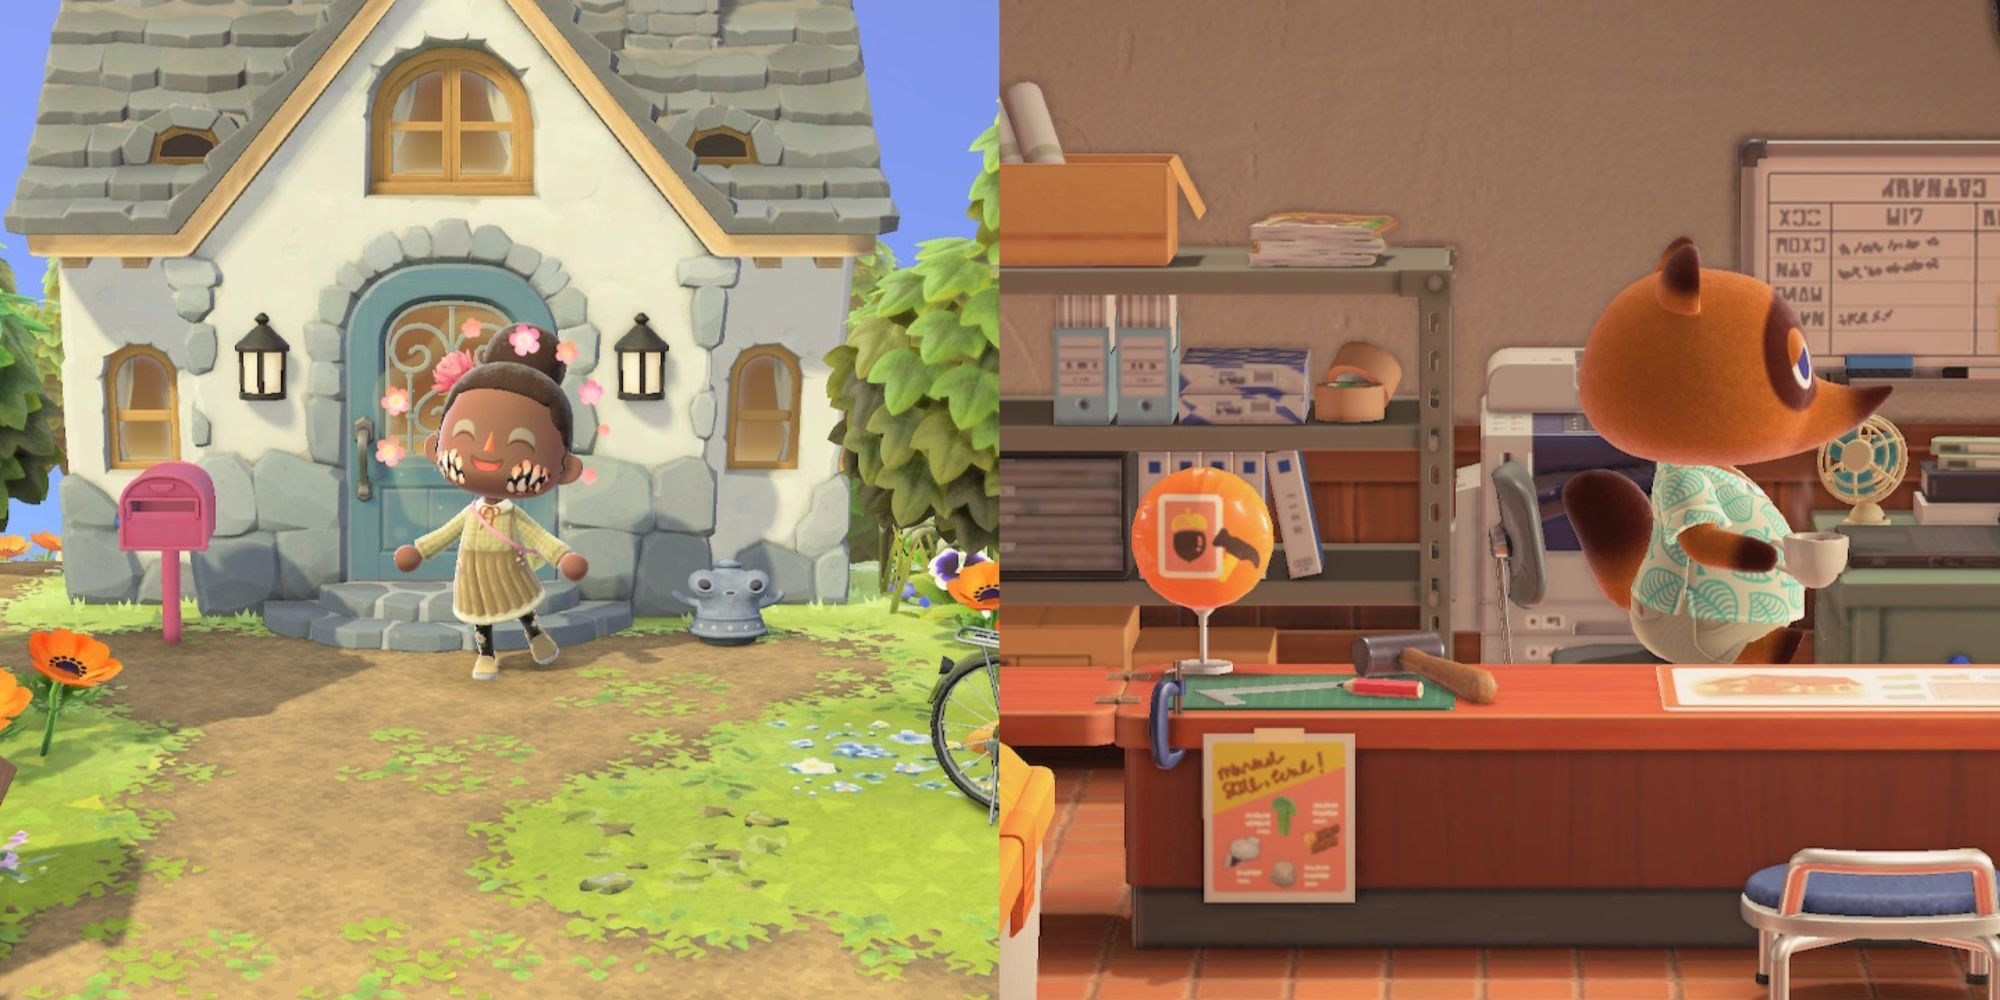 Split image featuring a player character using the Joy emote outside their white and grey stone house with grey stone roof, blue door, and pink mailbox and Tom Nook holding a coffee cup at his desk at Resident Services in Animal Crossing: New Horizons.